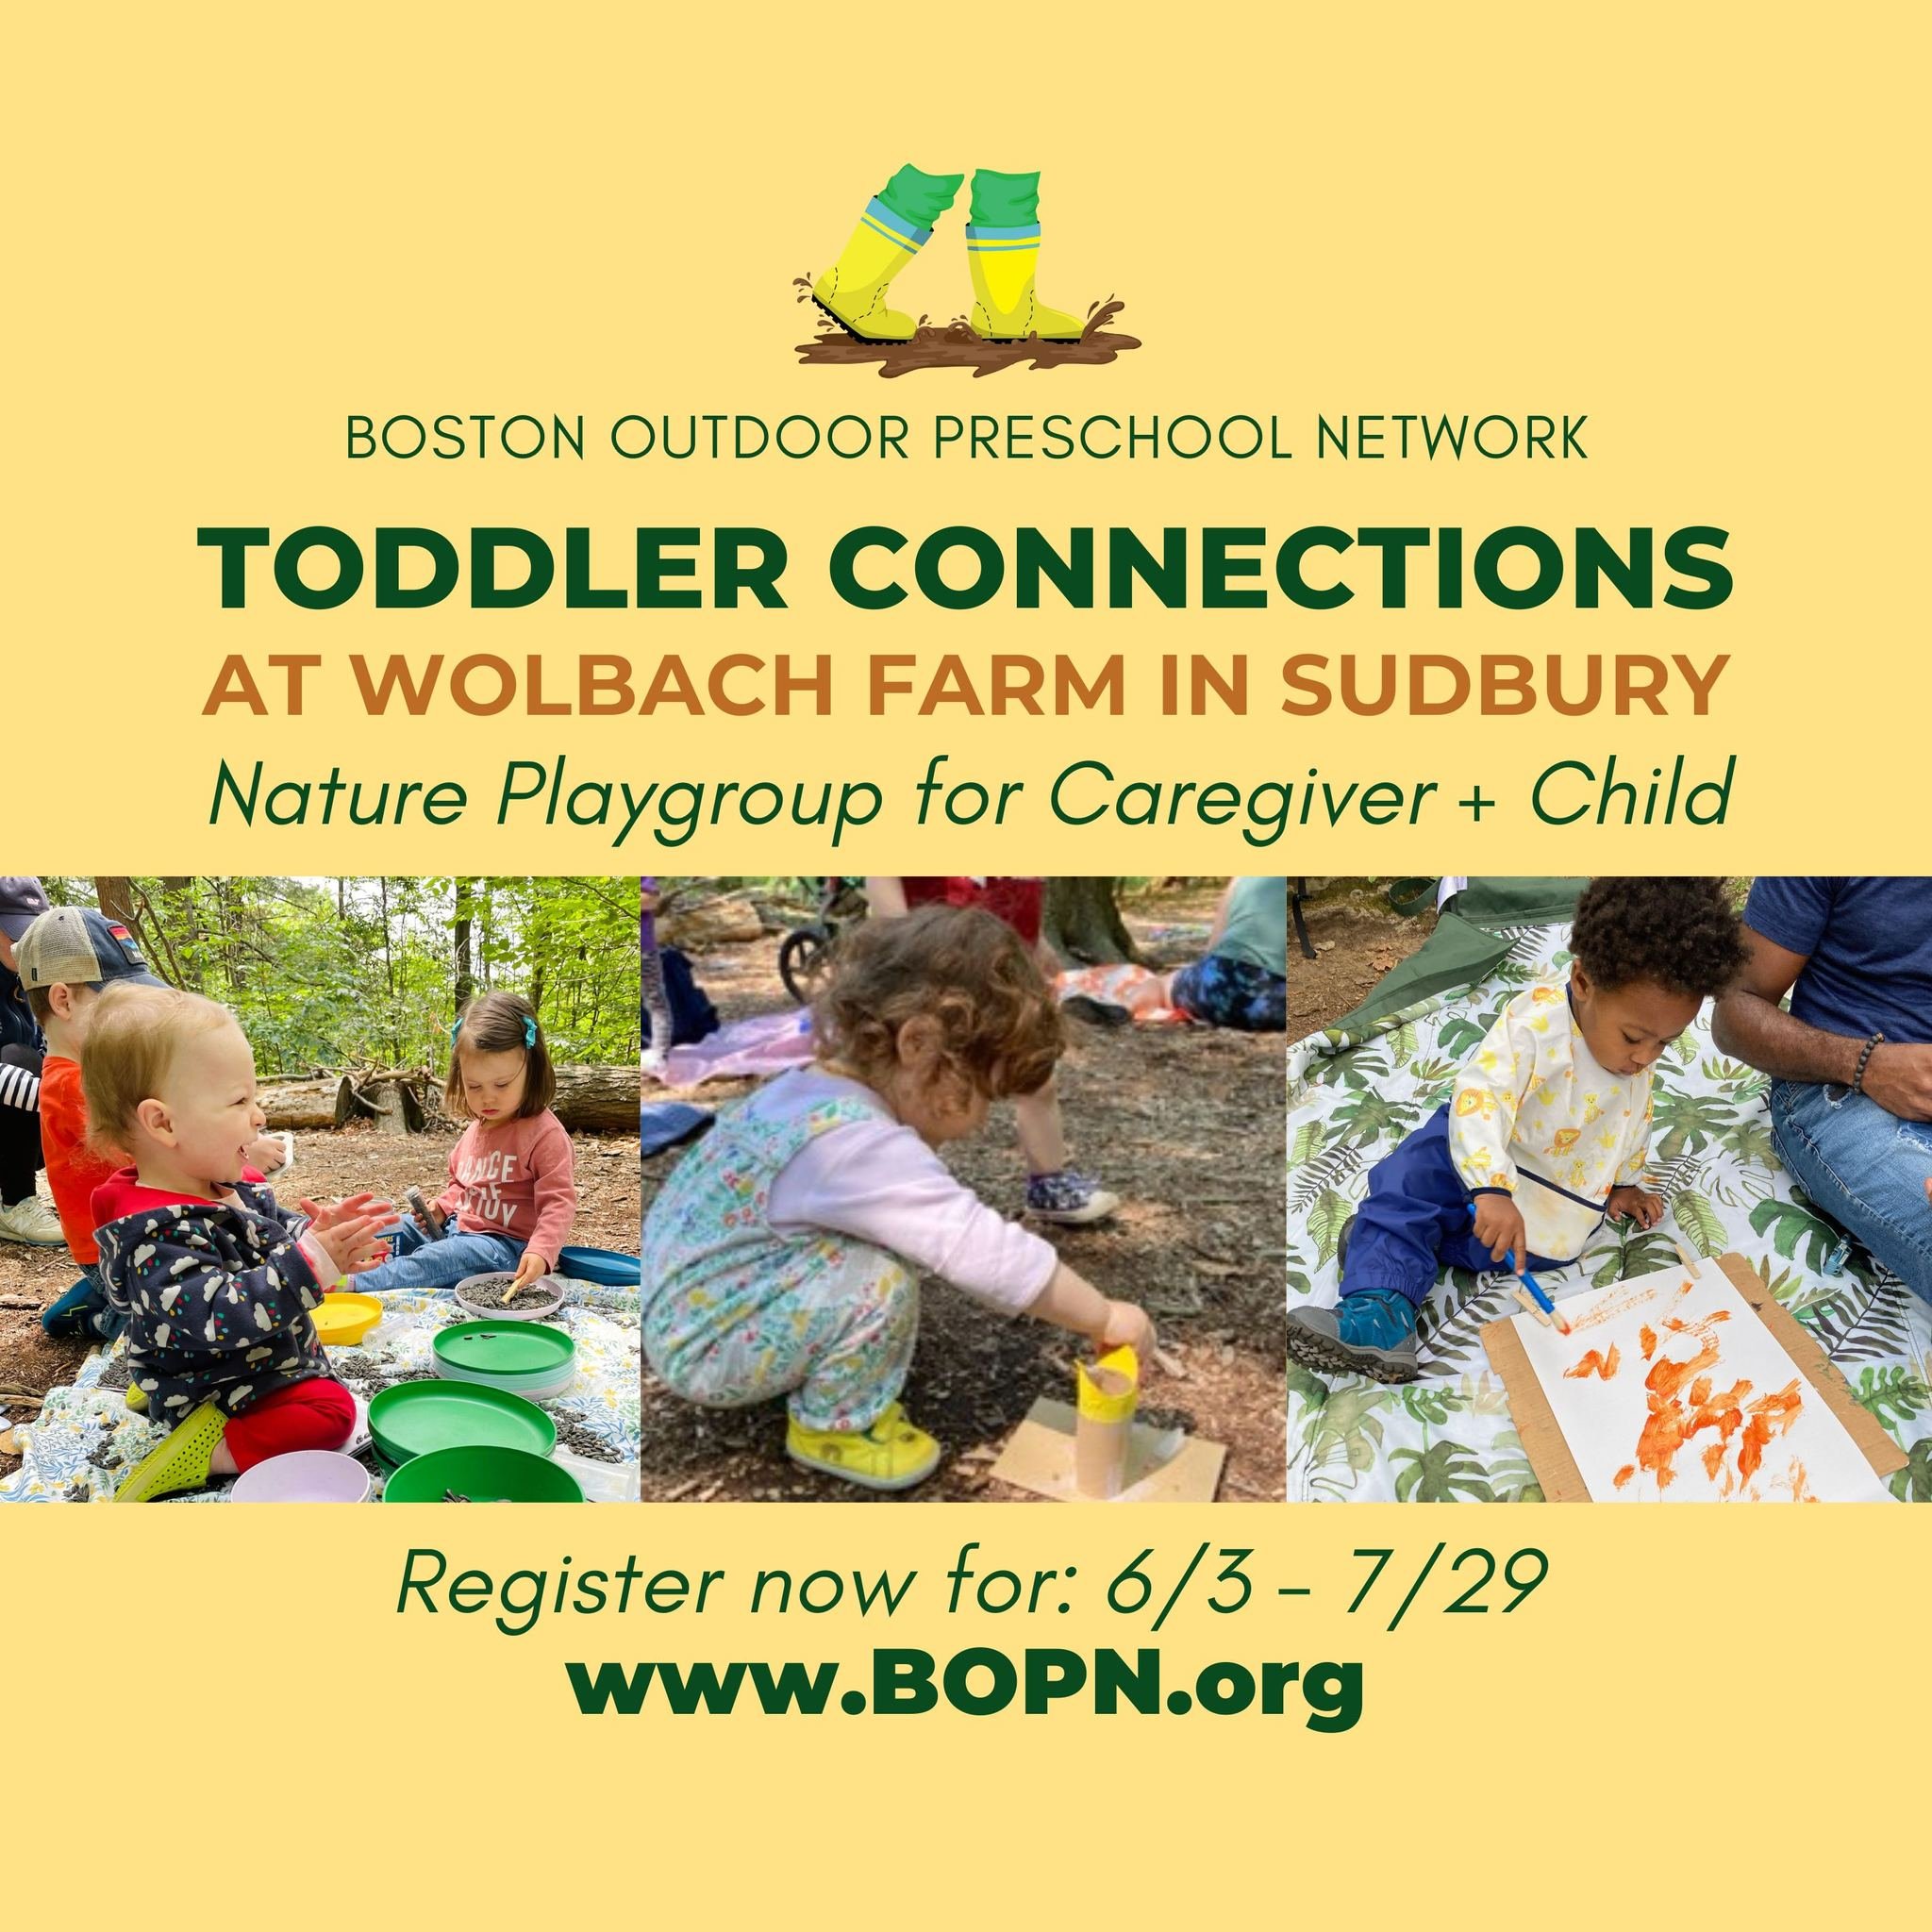 🌟 Now offering: Toddler Connections Playgroup at Wolbach Farm!

Calling all Sudbury families!  We're thrilled to expand this popular BOPN program to Wolbach Farm, for caregivers and children, ages 15 months - 2.9 years.

Created by BOPN Co-Founder S